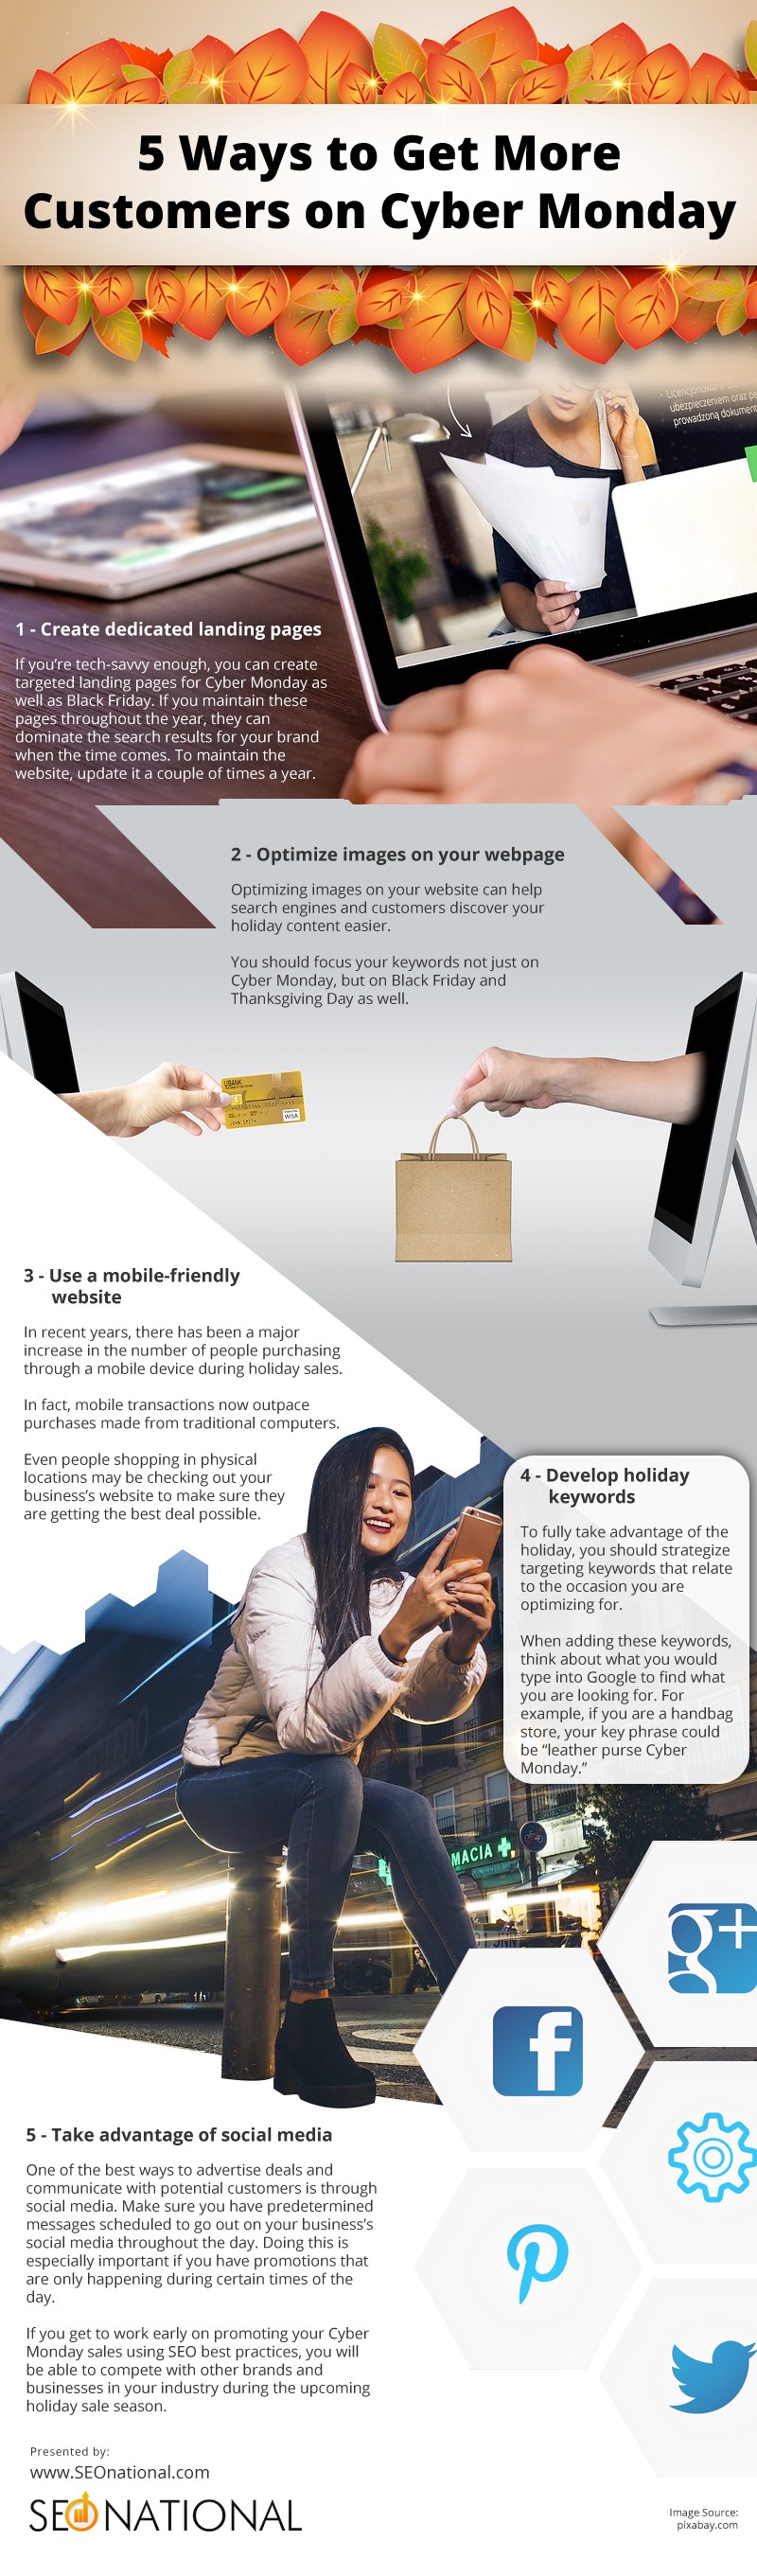 5-Ways-to-Get-More-Customers-on-Cyber-Monday Infographic